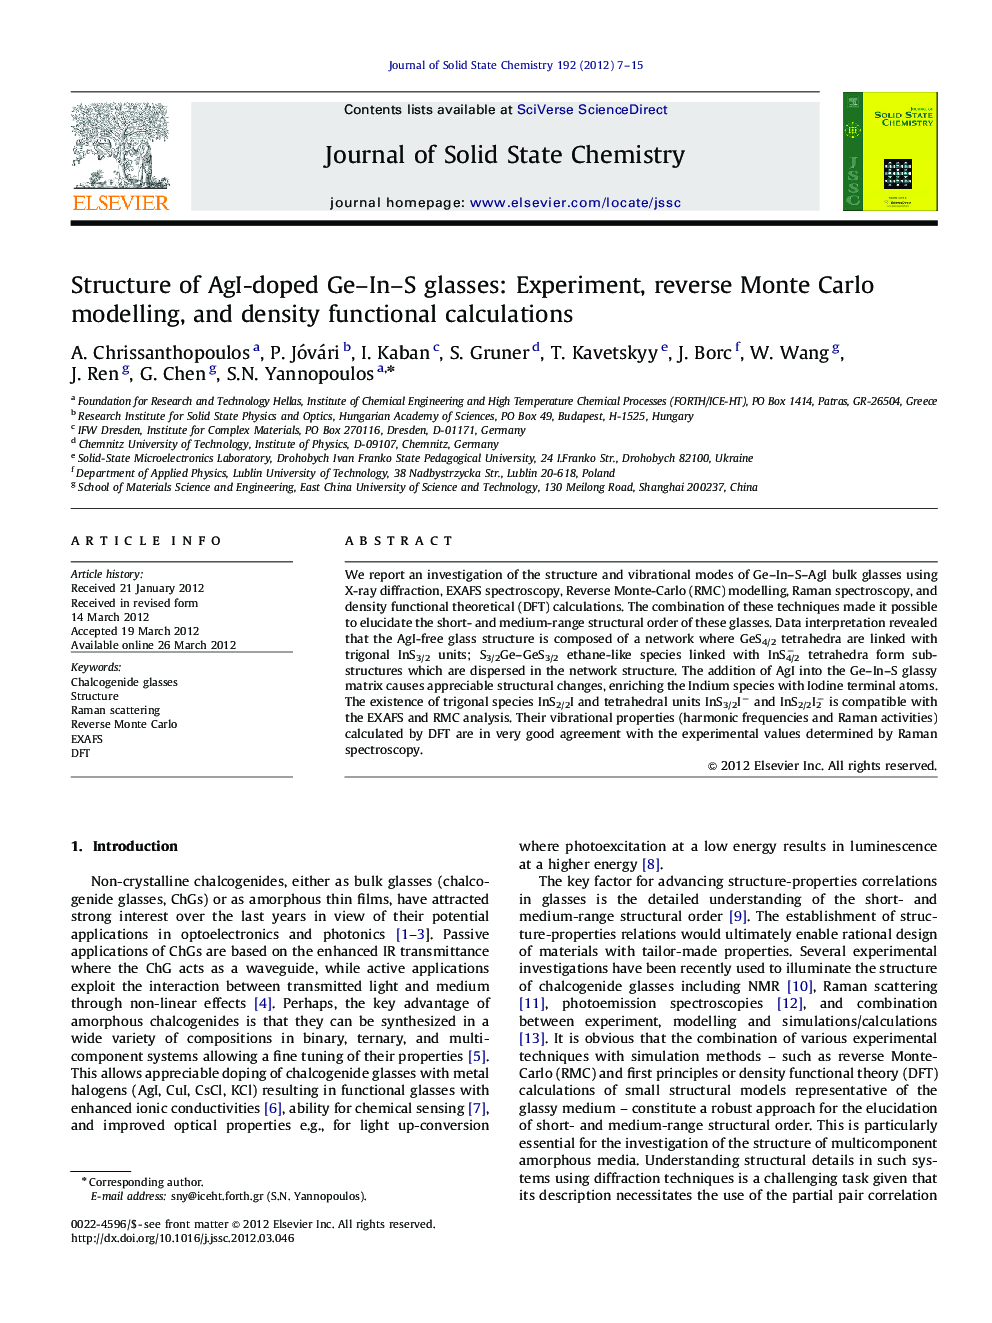 Structure of AgI-doped Ge–In–S glasses: Experiment, reverse Monte Carlo modelling, and density functional calculations